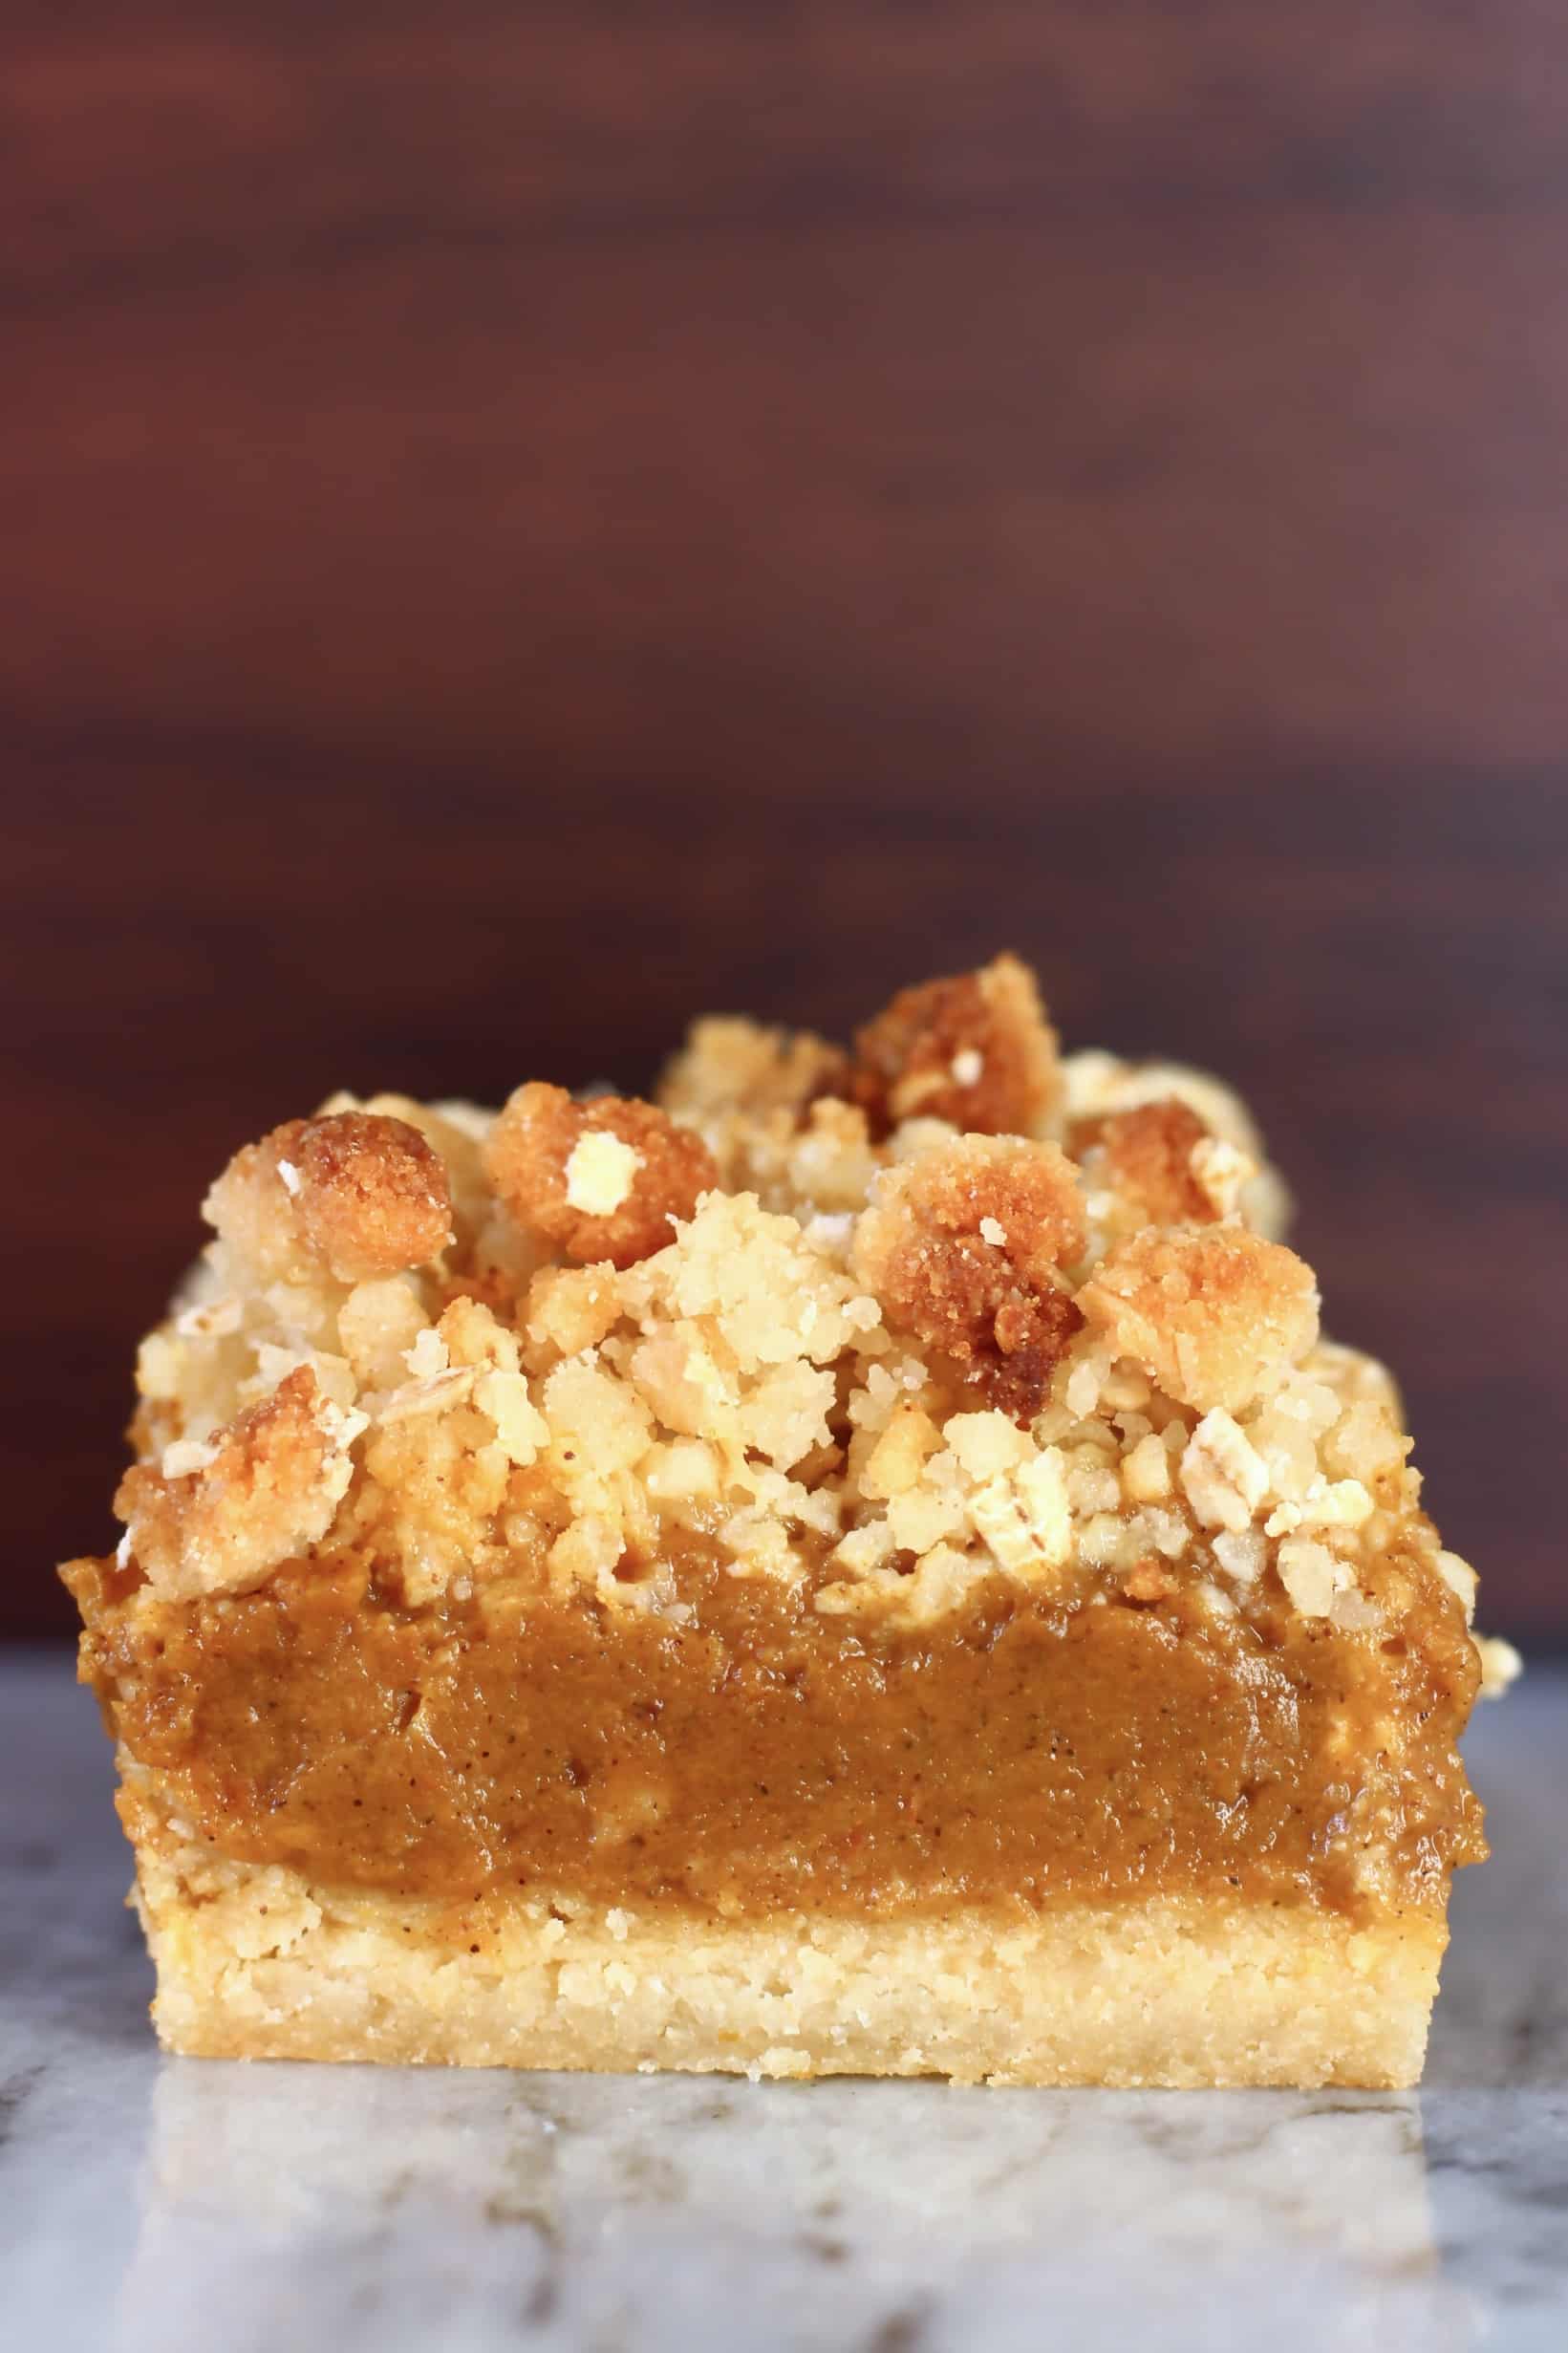 A vegan pumpkin pie bar with crumble topping against a brown background